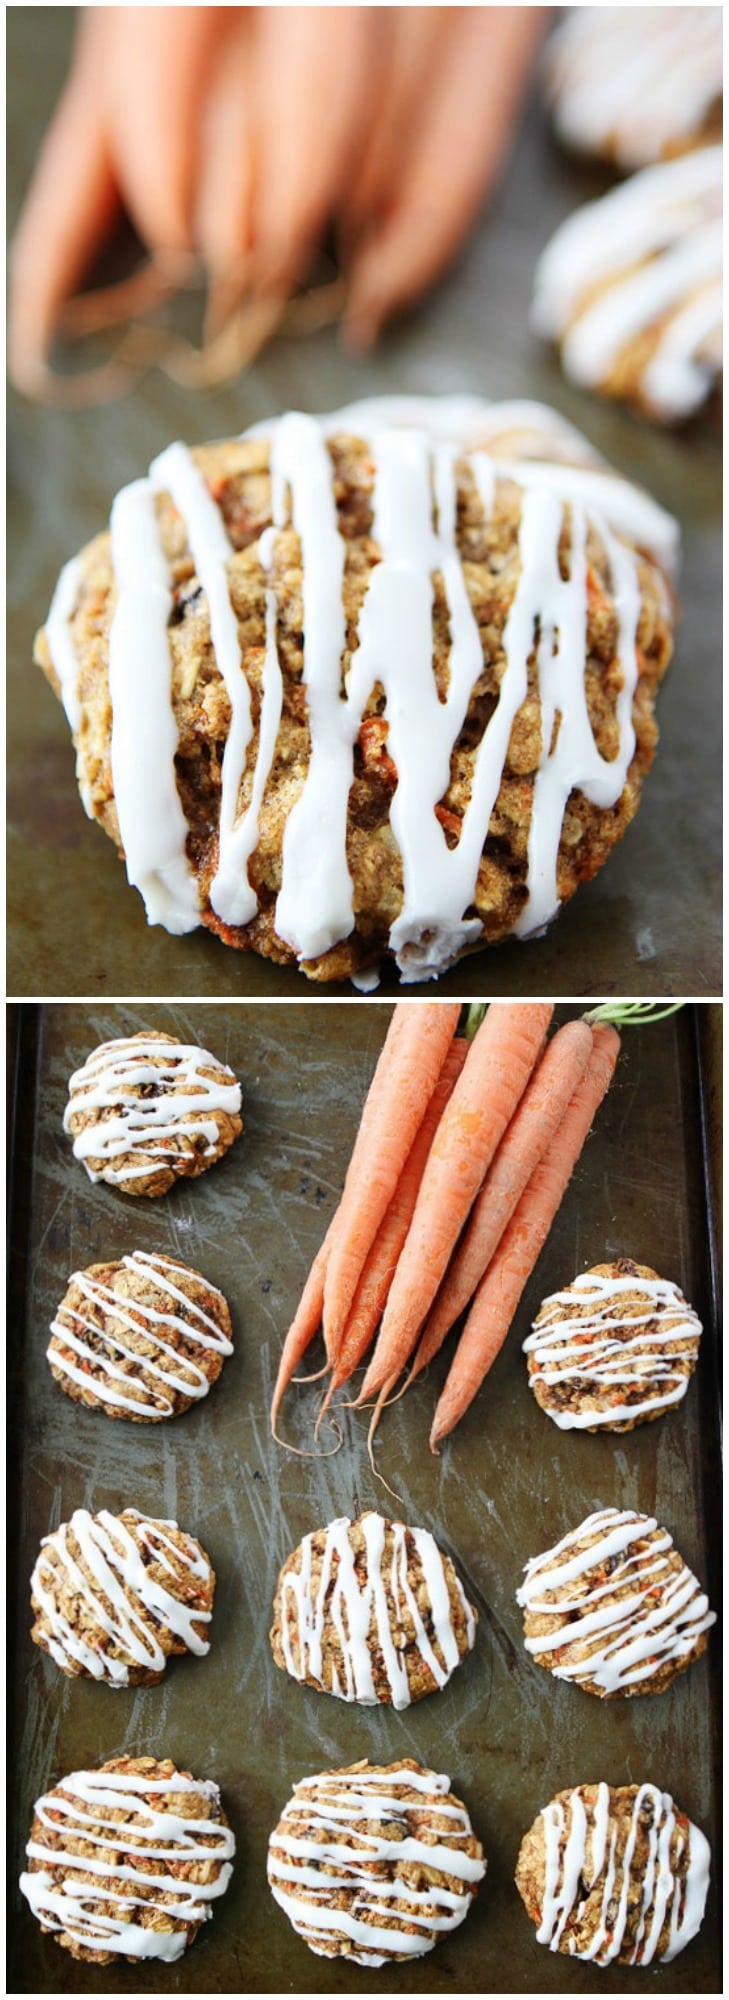 Carrot Cake Oatmeal Cookies with Cream Cheese Glaze Recipe on twopeasandtheirpod.com If you like carrot cake you will LOVE these cookies!